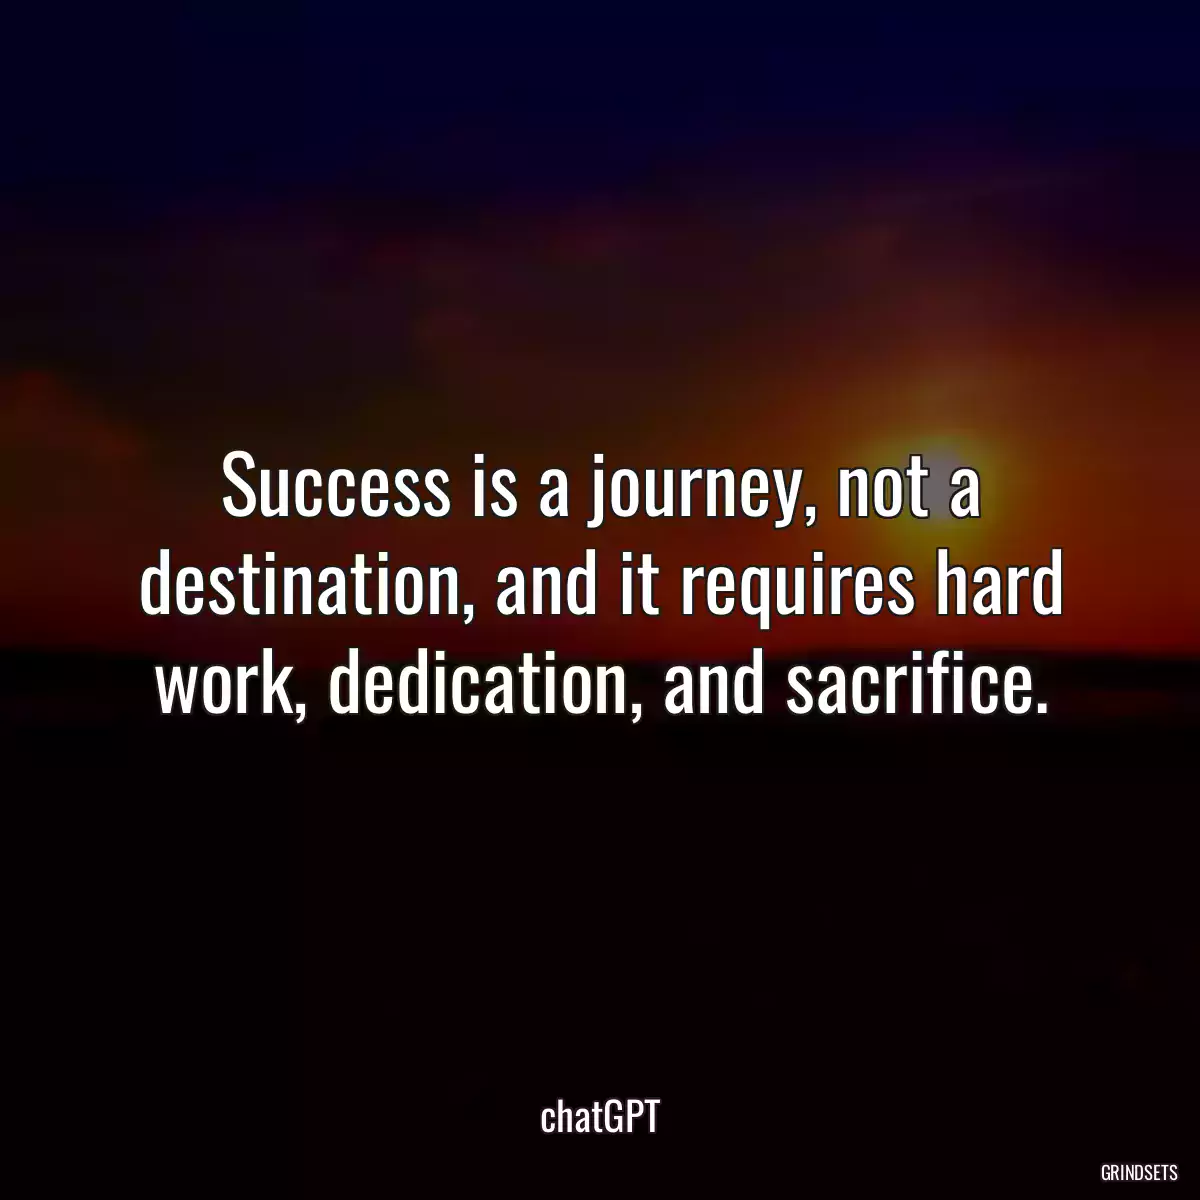 Success is a journey, not a destination, and it requires hard work, dedication, and sacrifice.